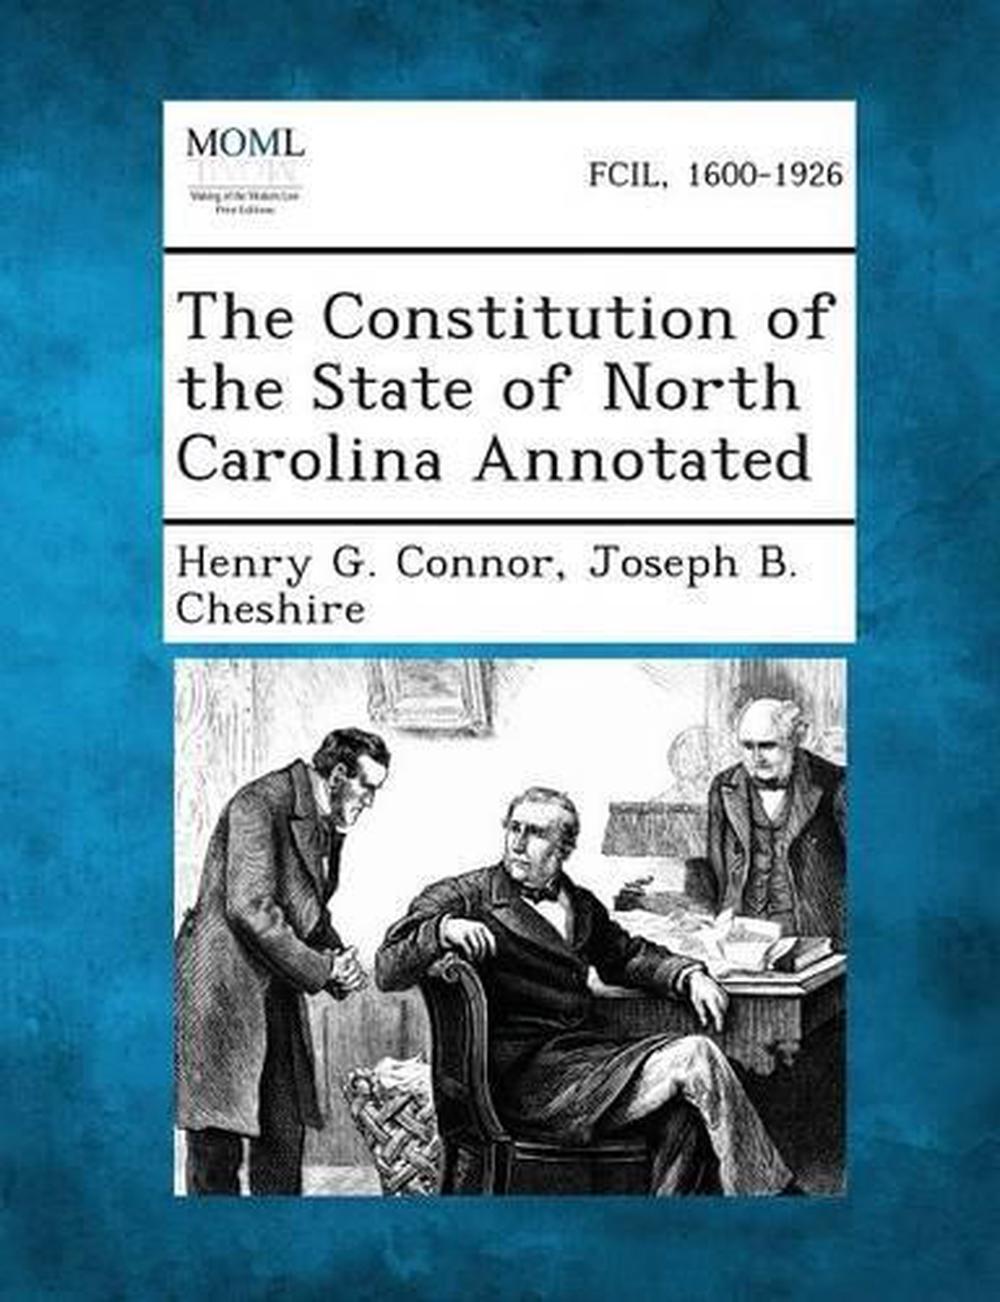 the-constitution-of-the-state-of-north-carolina-annotated-by-henry-g